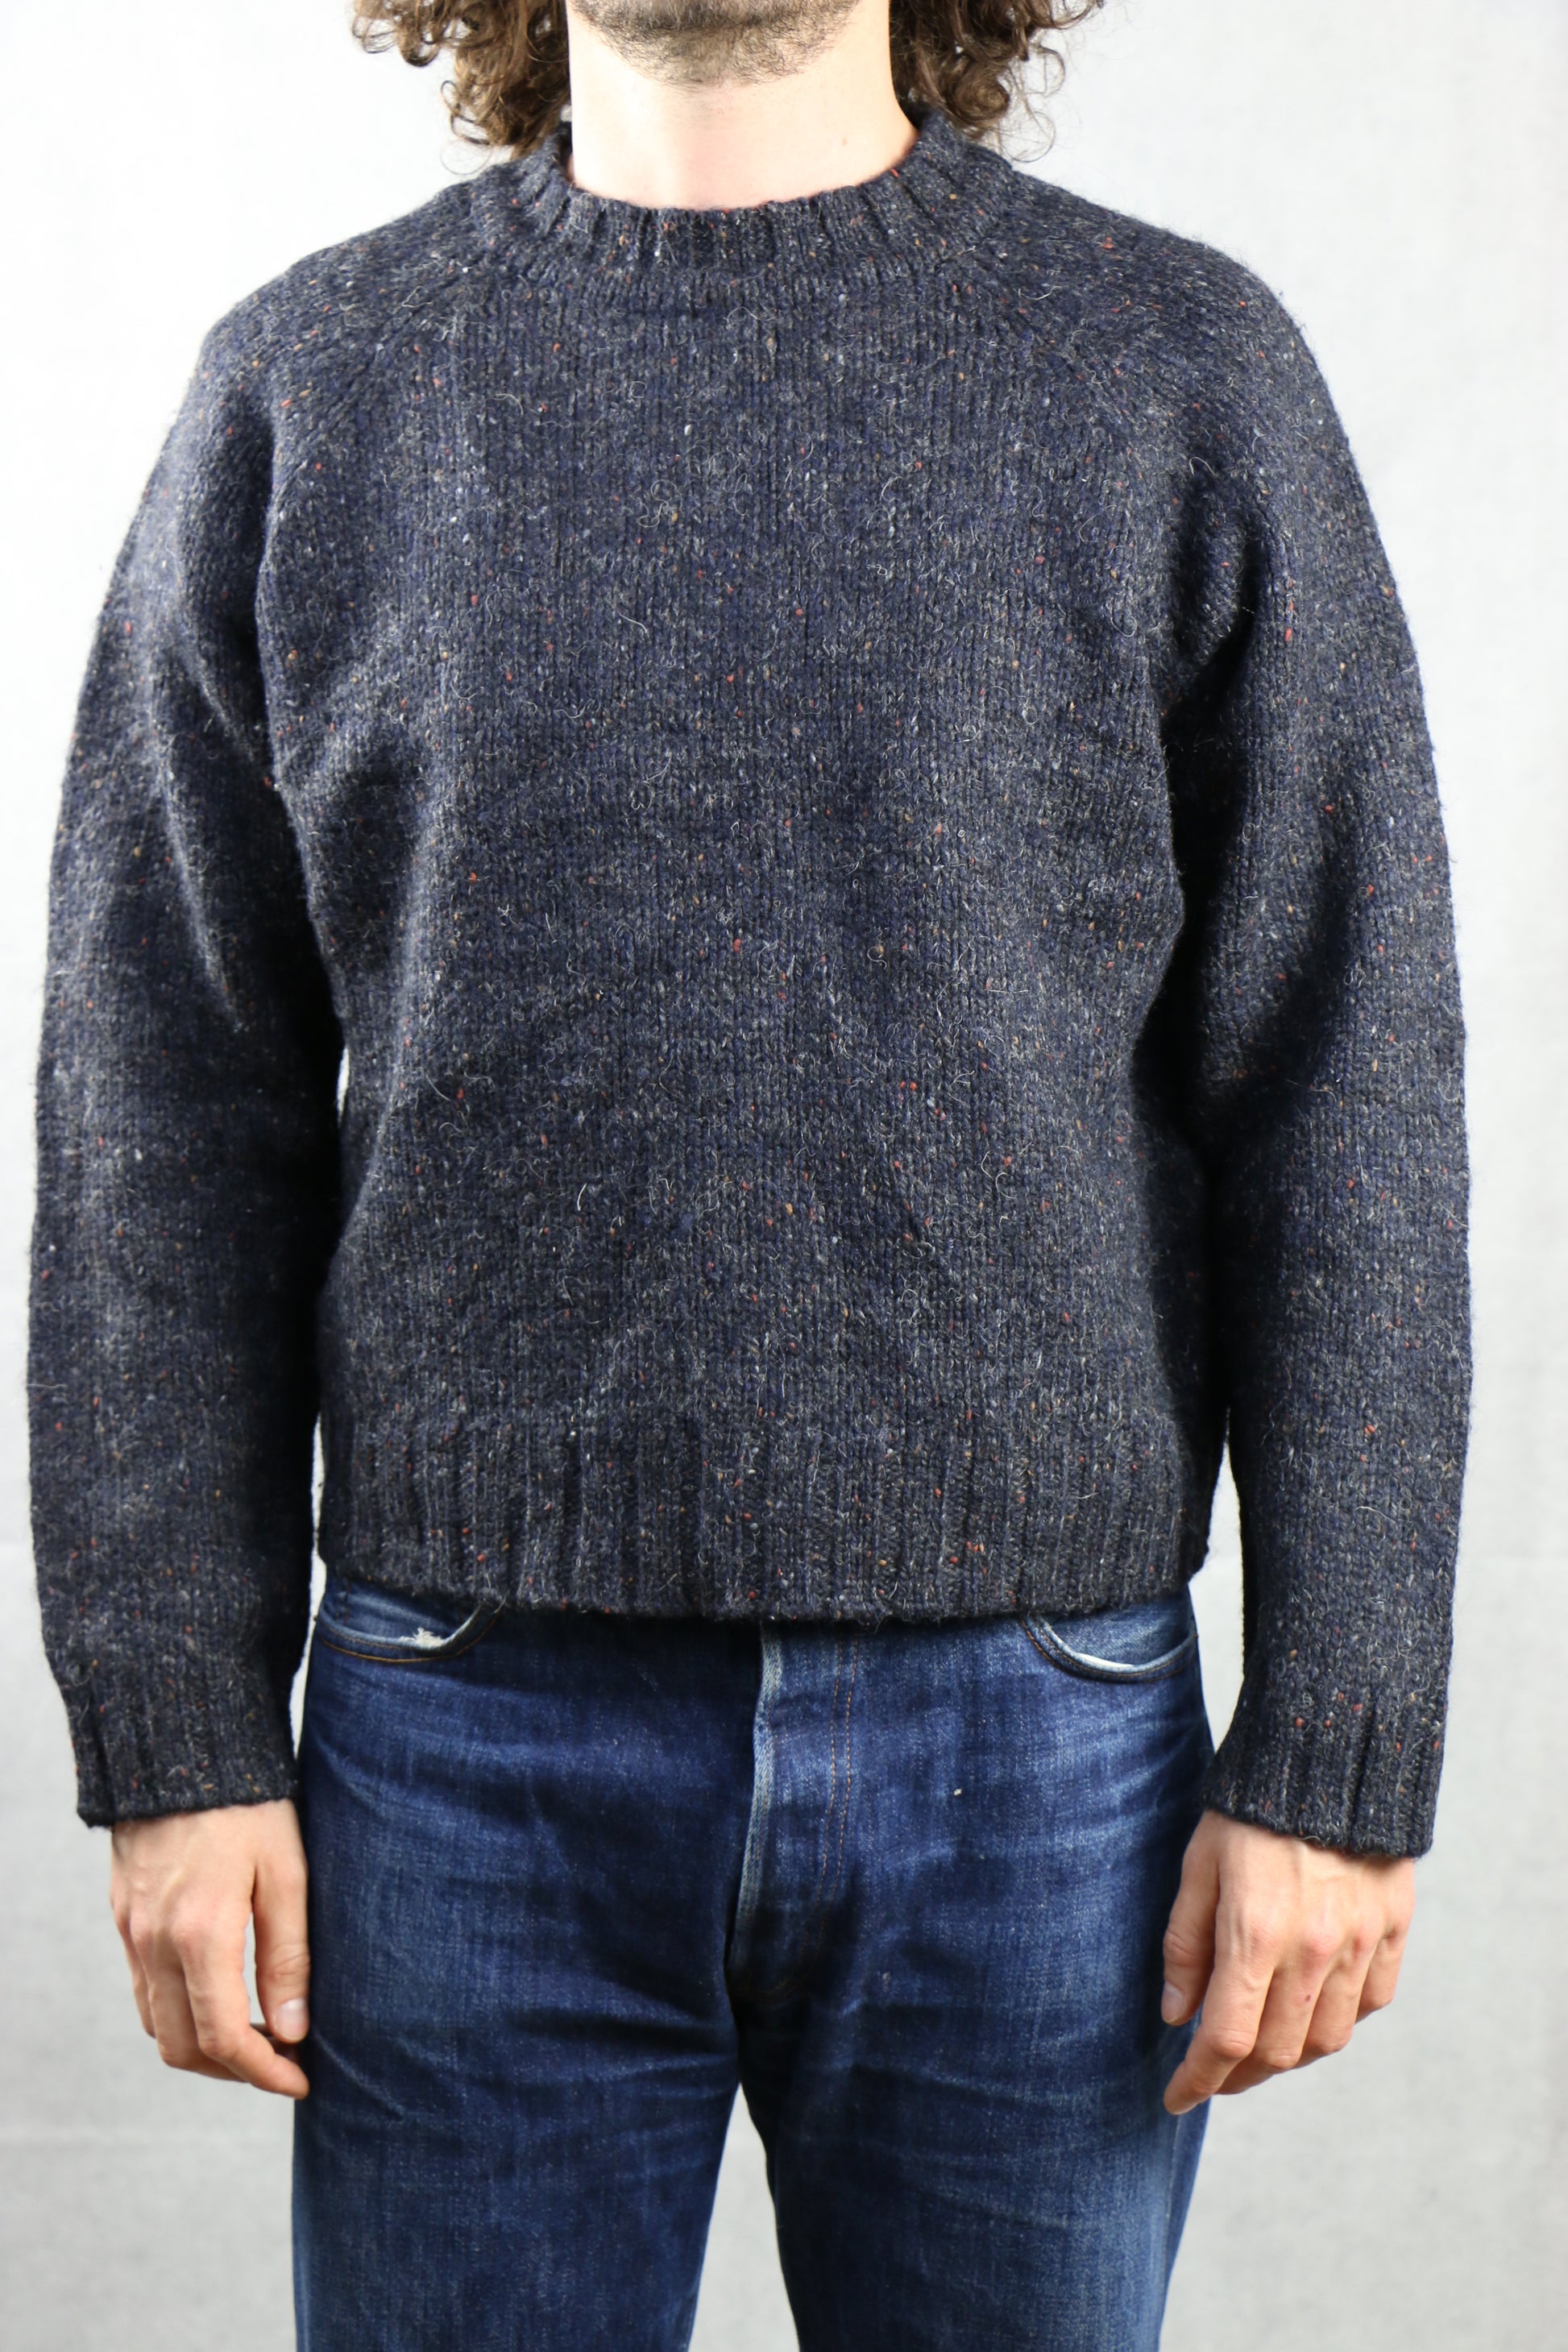 Abercrombie & Fitch Sweater - vintage clothing clochard92.com